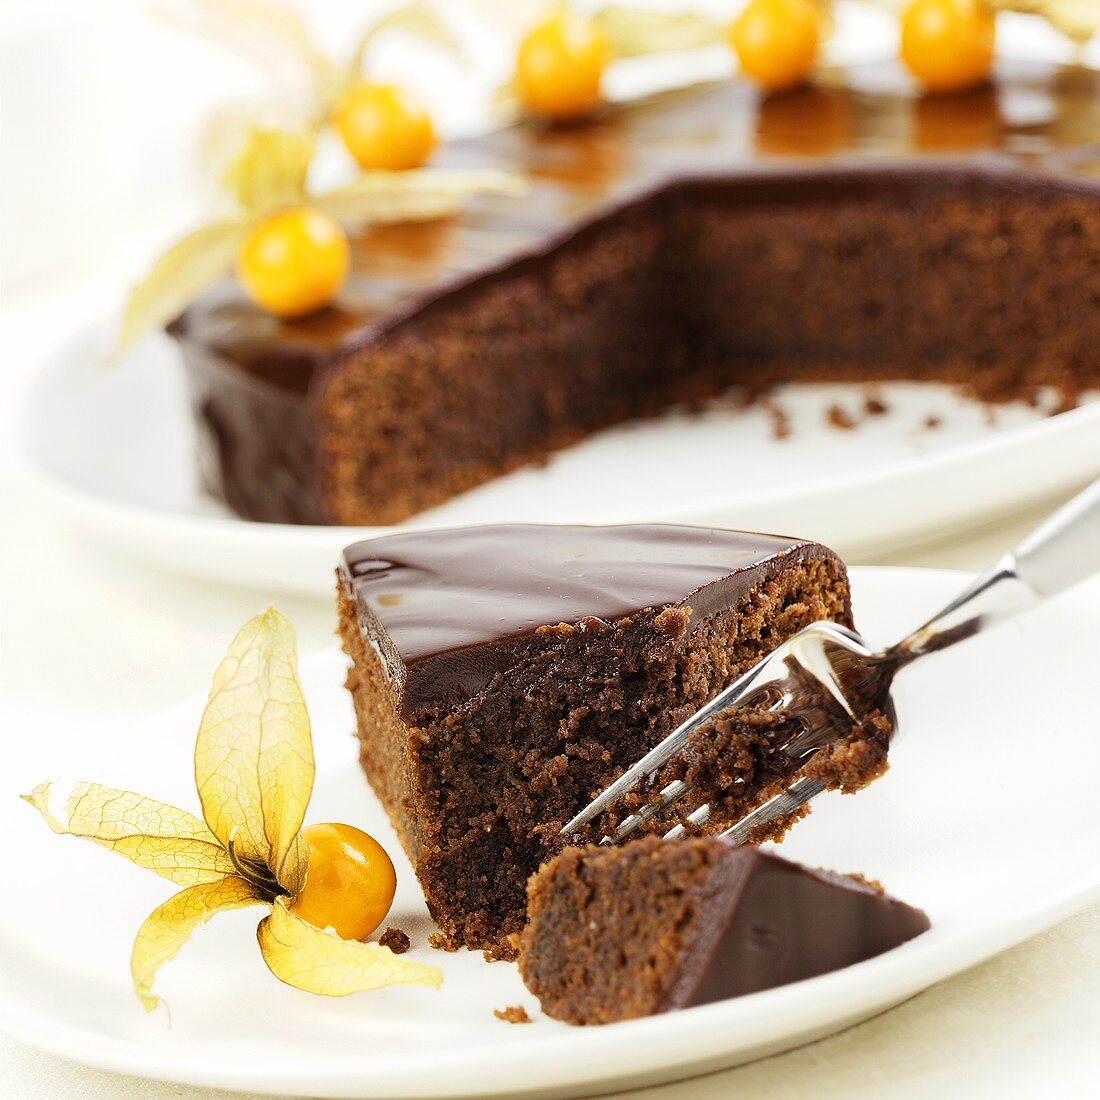 A piece of Sacher torte with physalis